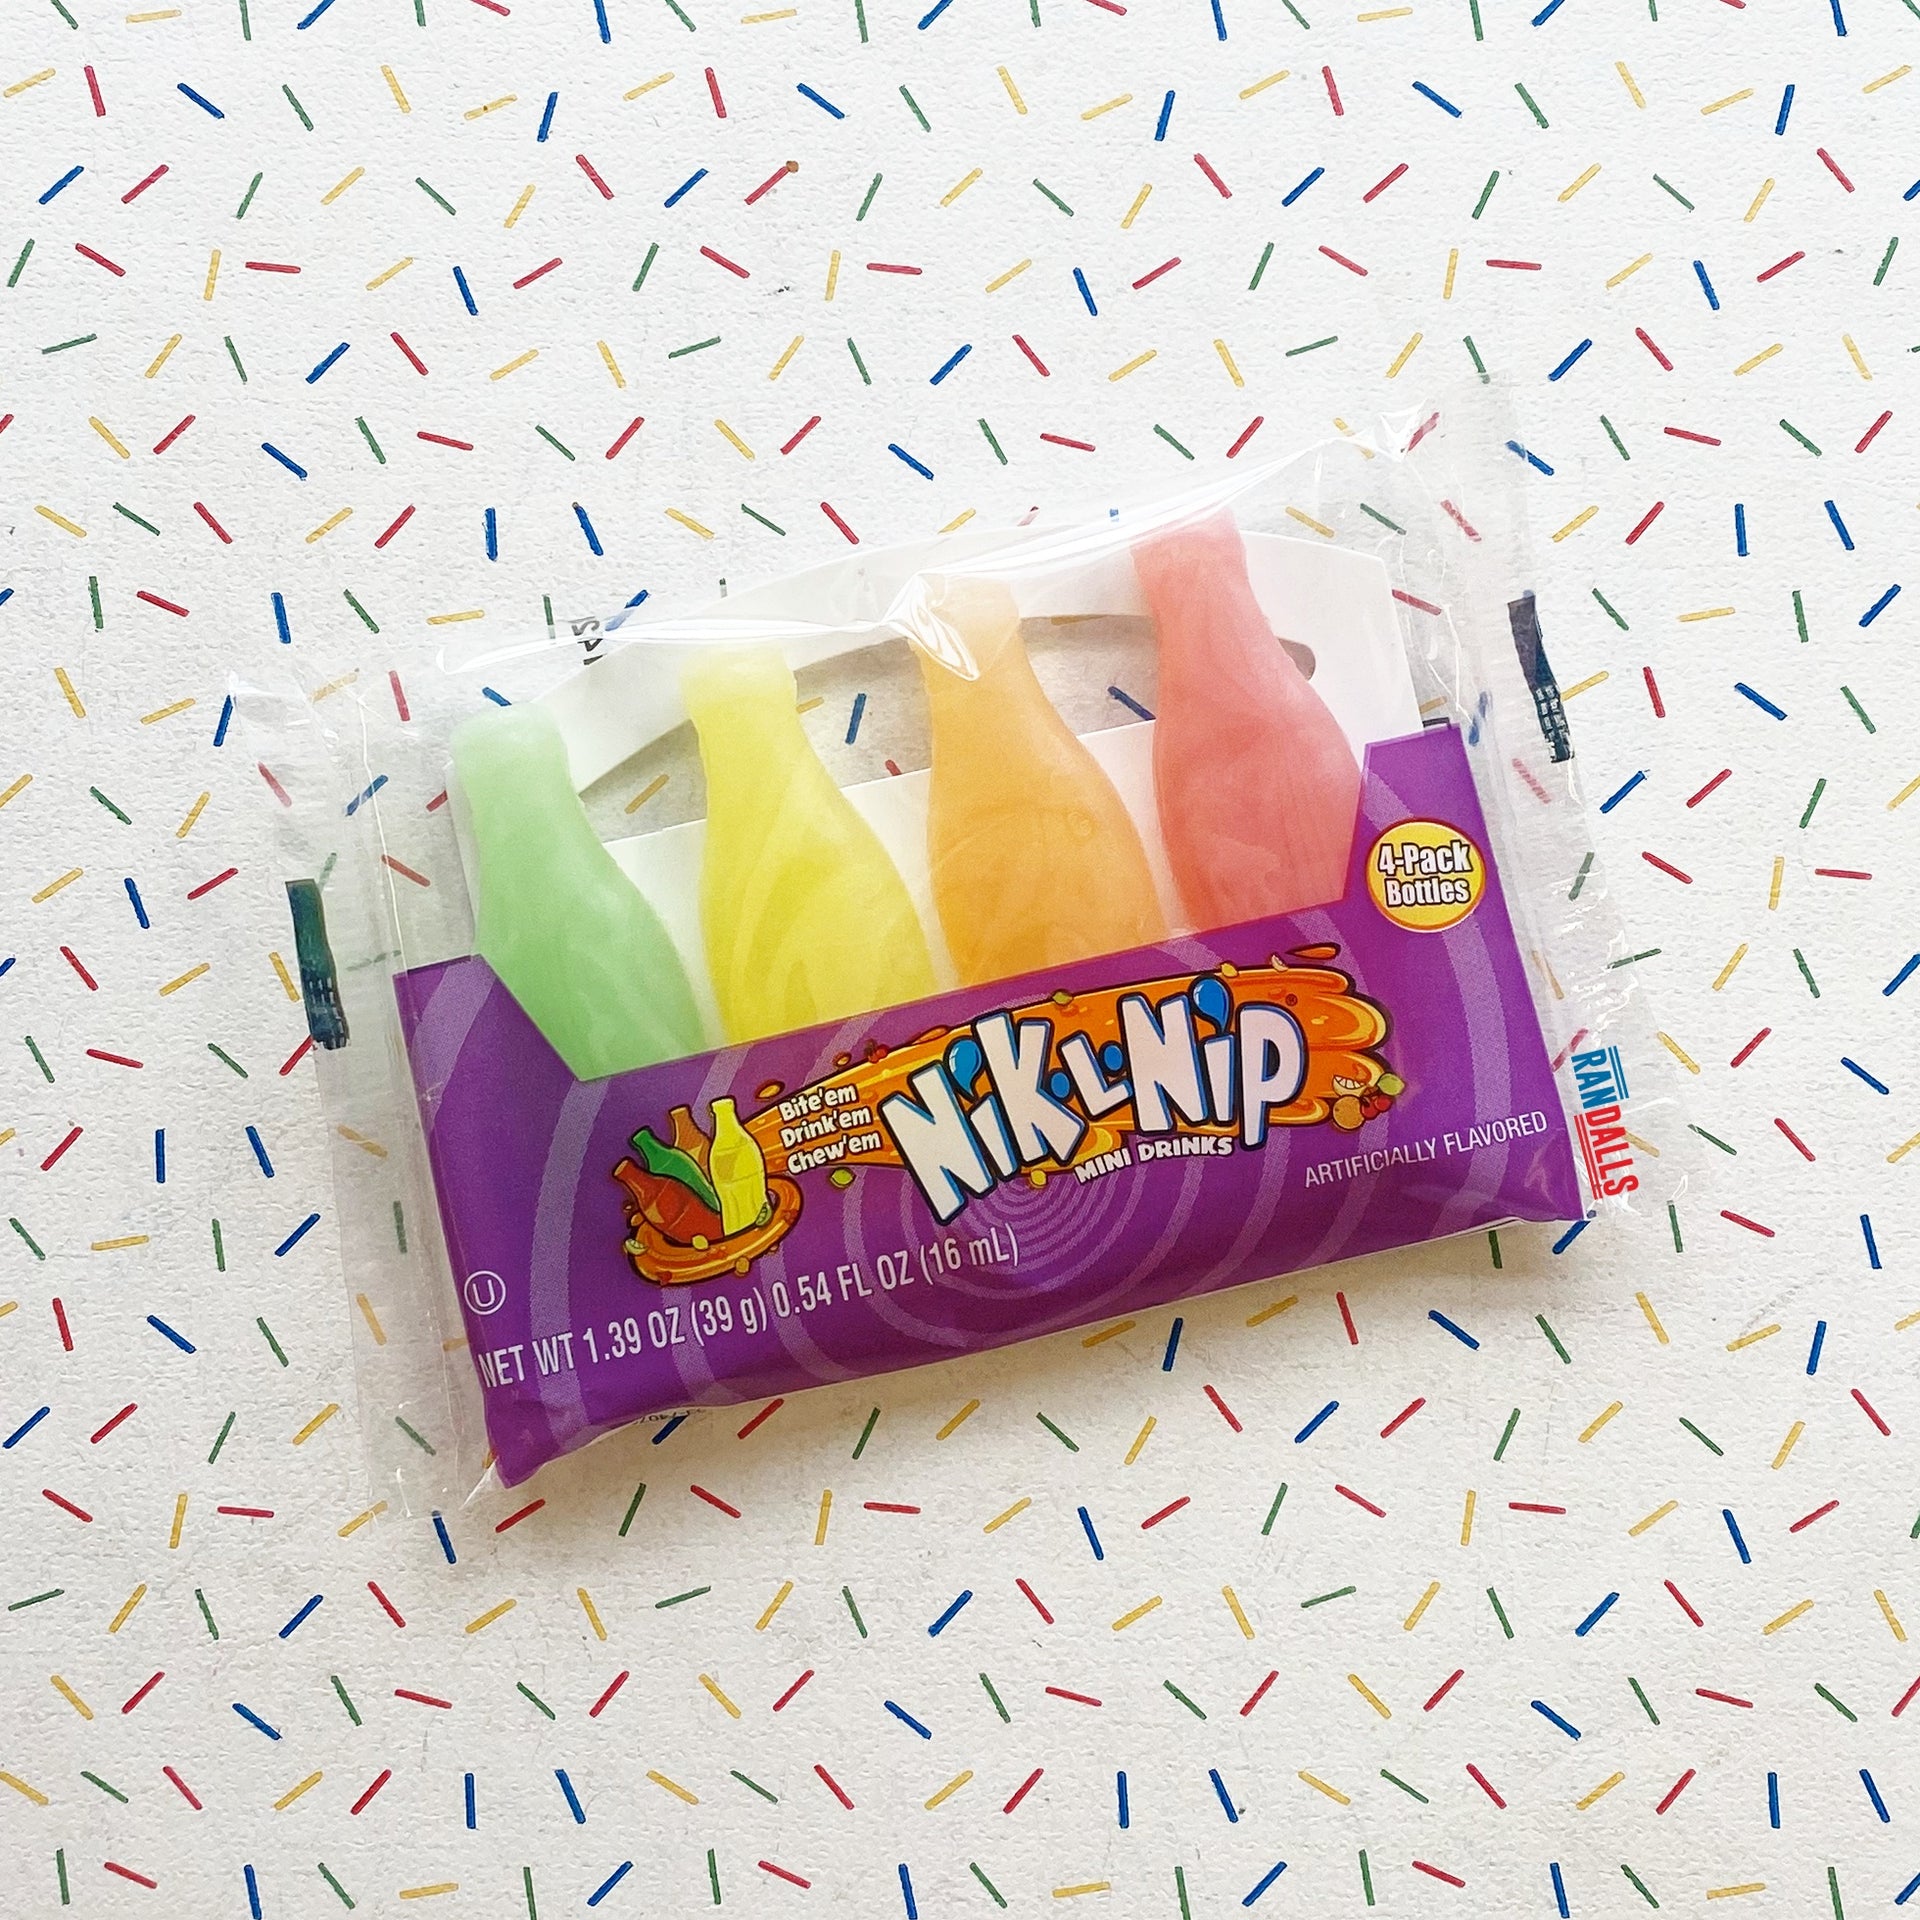 Nik-L-Nip Wax Sticks Candy Drinks Filled with Flavored Syrups 1.5 Pounds